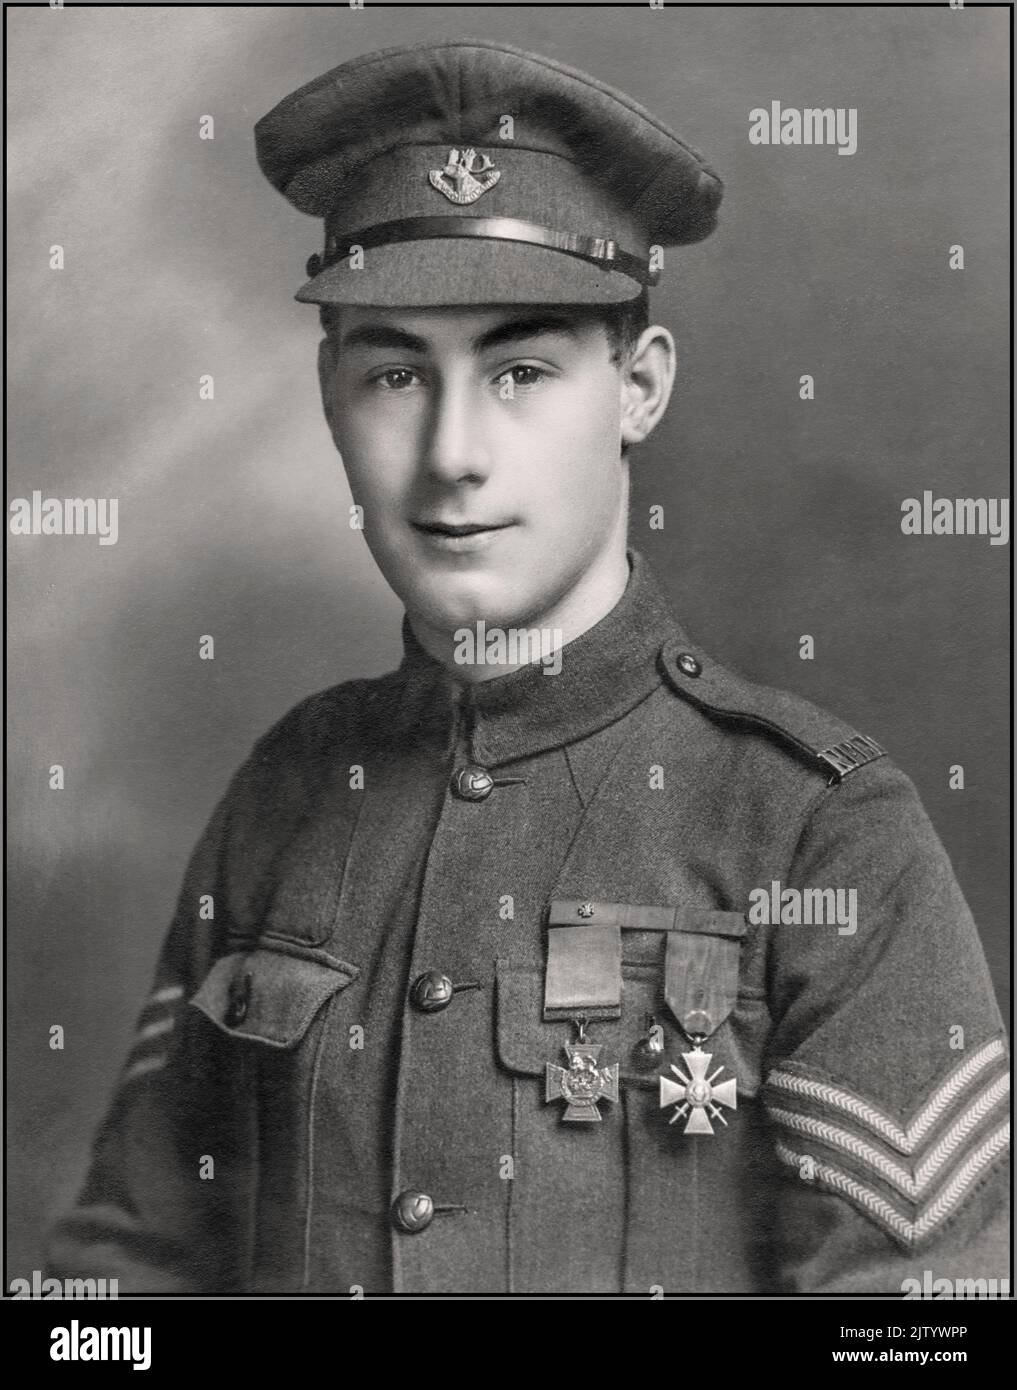 VICTORIA CROSS Thomas Ricketts, VC In 1918 during the First World War, 17-year old Newfoundland soldier Tommy Ricketts became the youngest-ever recipient of the Victoria Cross. Ricketts, who was 17 years old and a private in the 1st Battalion, Royal Newfoundland Regiment during the First World War, was cited in the London Gazette for his actions on October 14, 1918. 'During the advance from Ledeghem (Belgium) the attack was temporarily held up by heavy hostile fire, and the platoon to which he belonged suffered severe casualties from the fire of a battery at point blank range WW1 Stock Photo